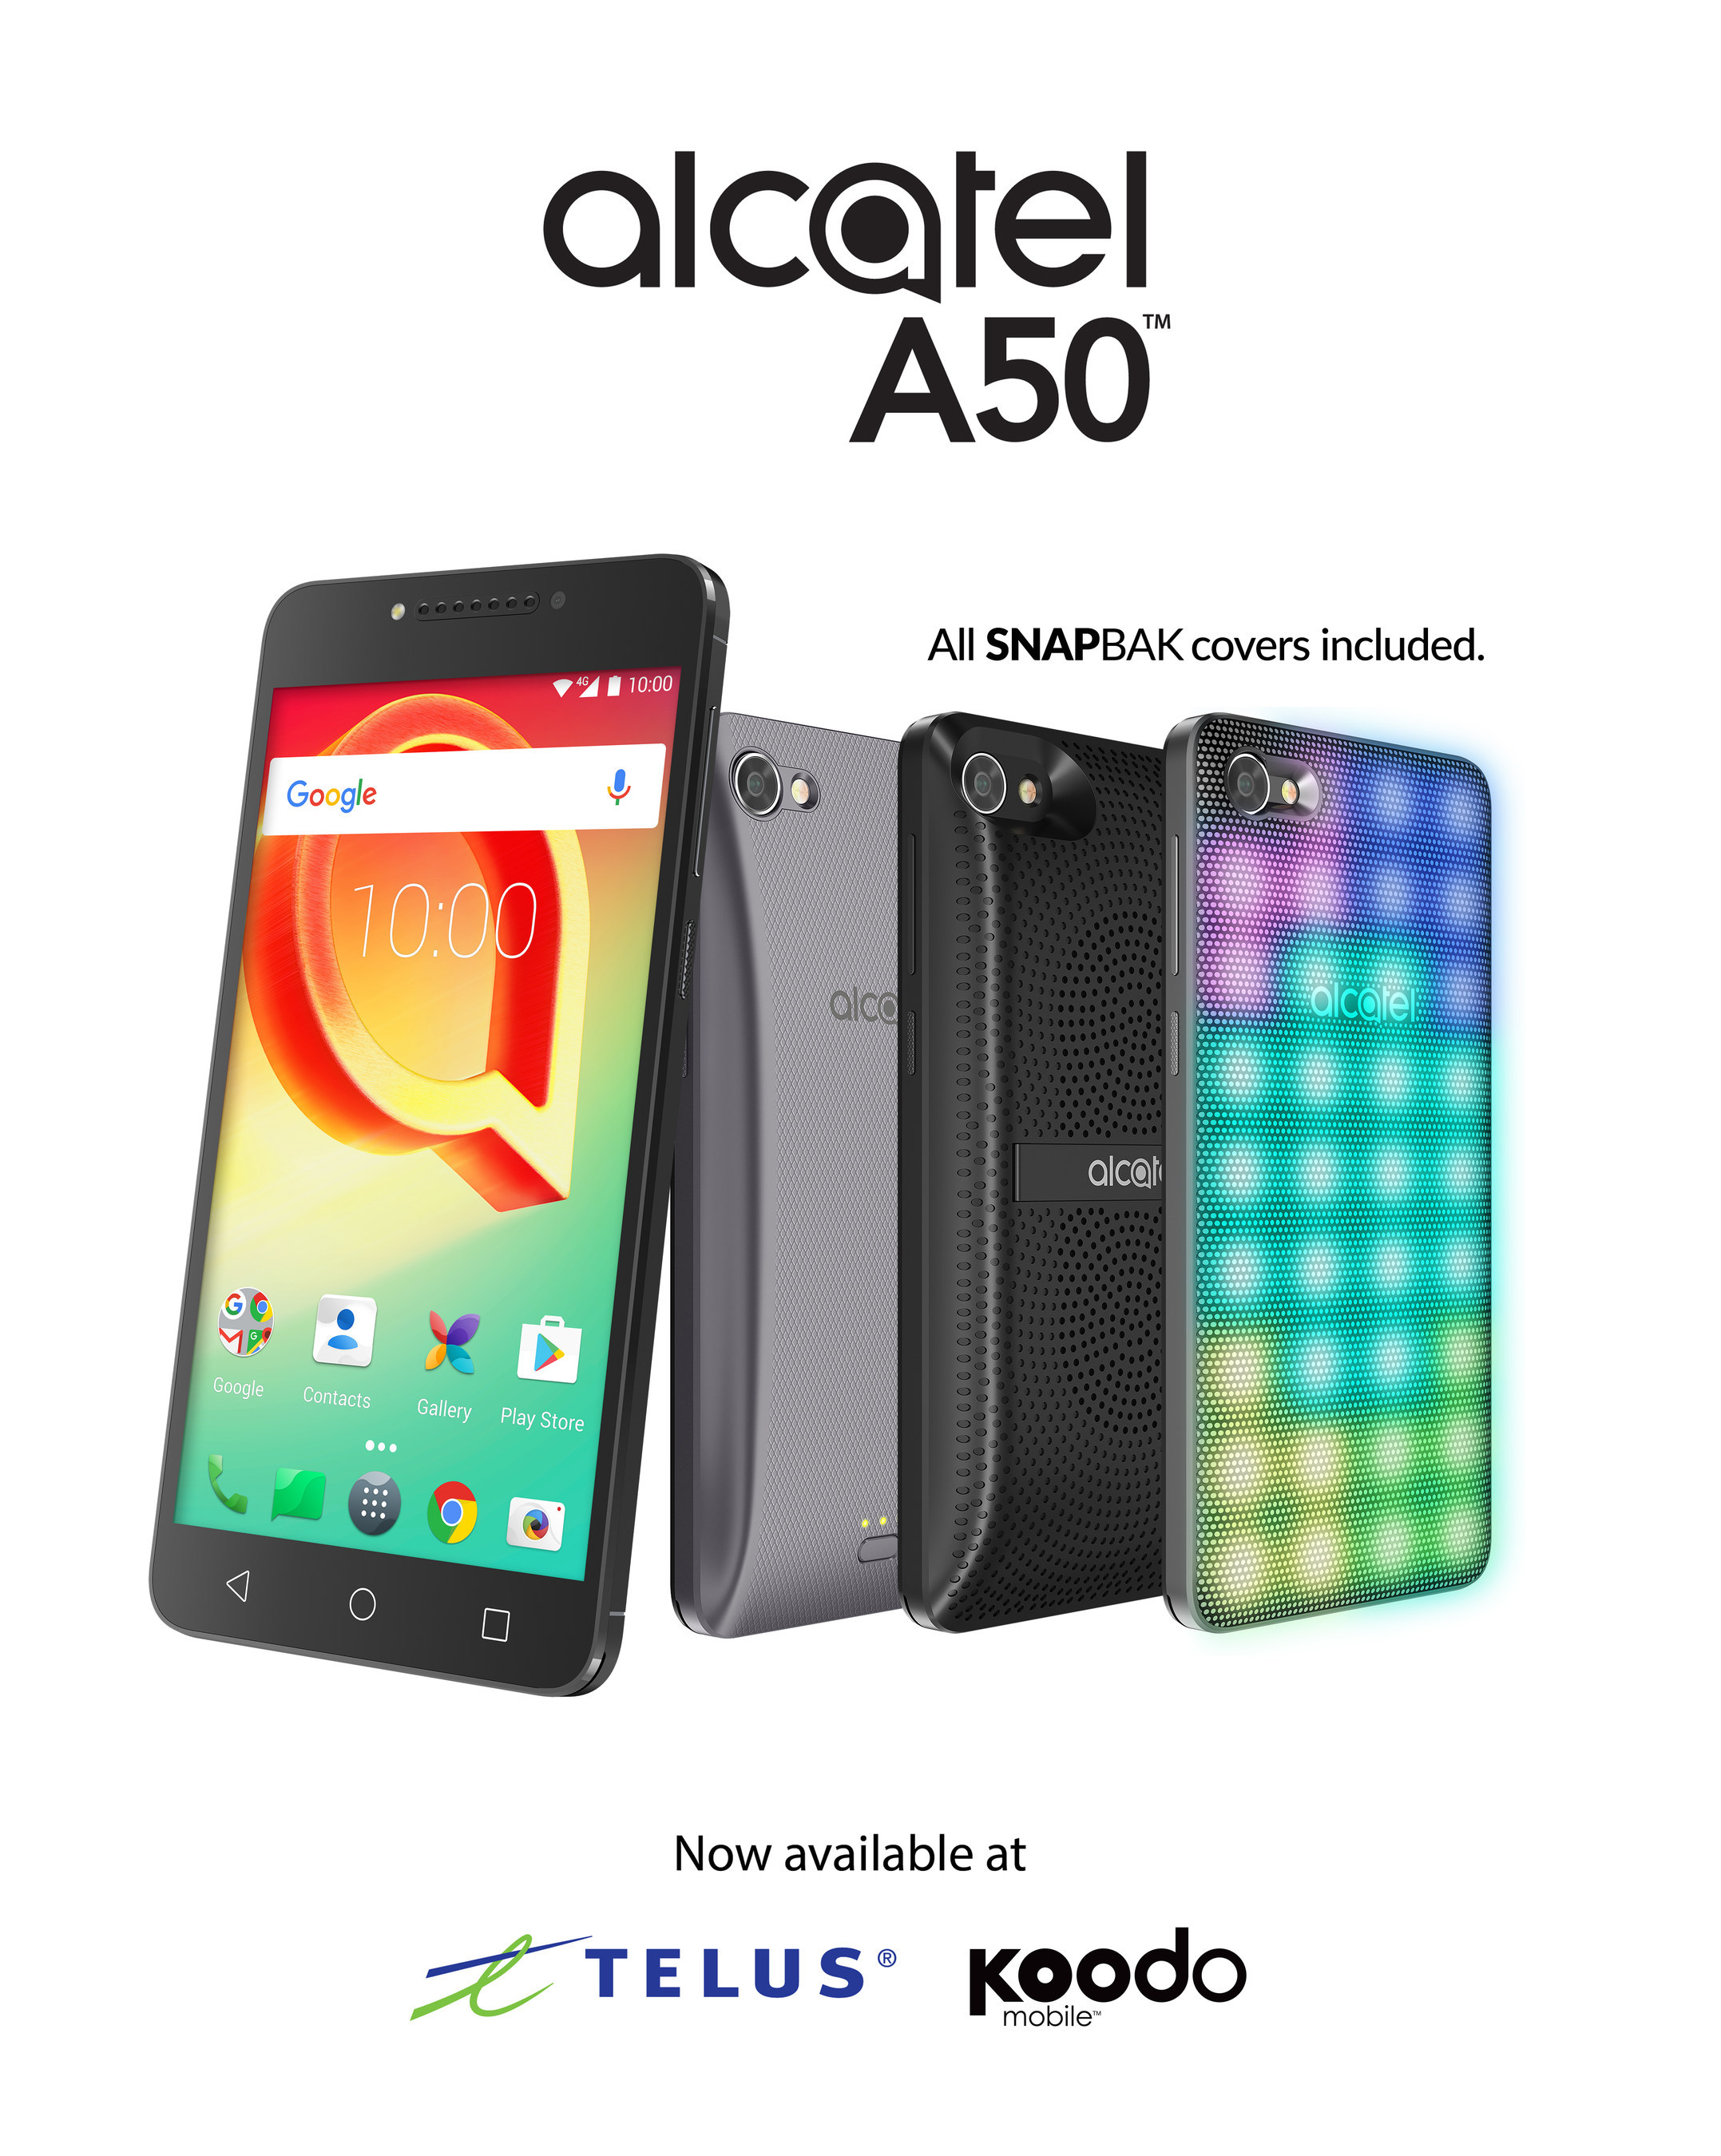 Alcatel-Mix- Match- and Customize the Alcatel A50- Smartphone to